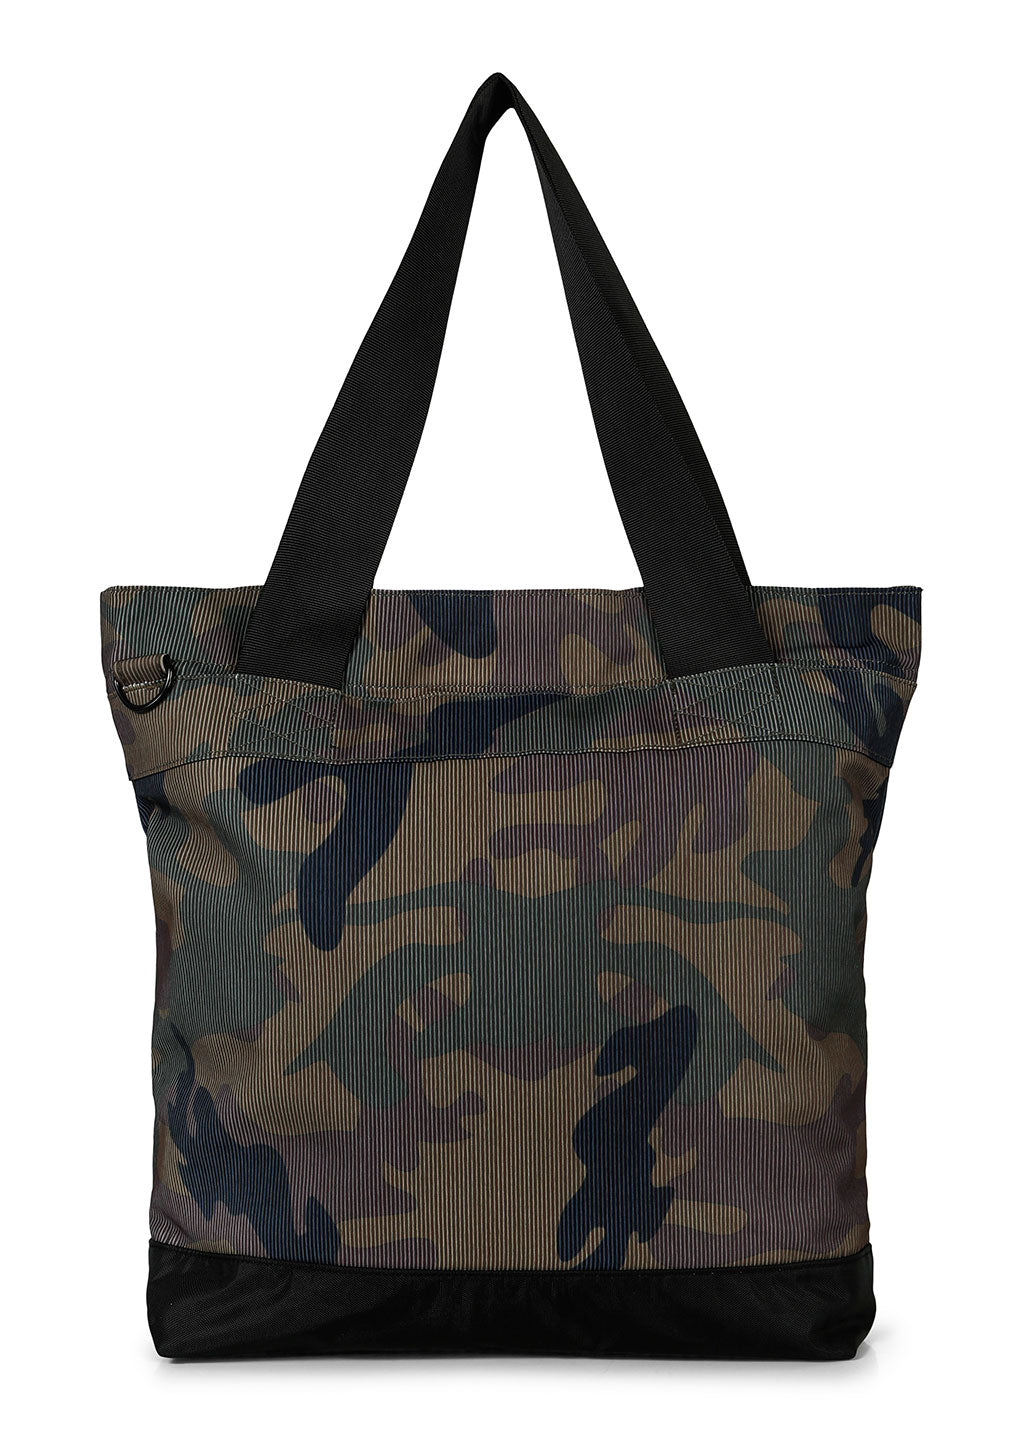 BRGN by Lunde & Gaundal Shoulder Bag Accessories 988 Camo Print